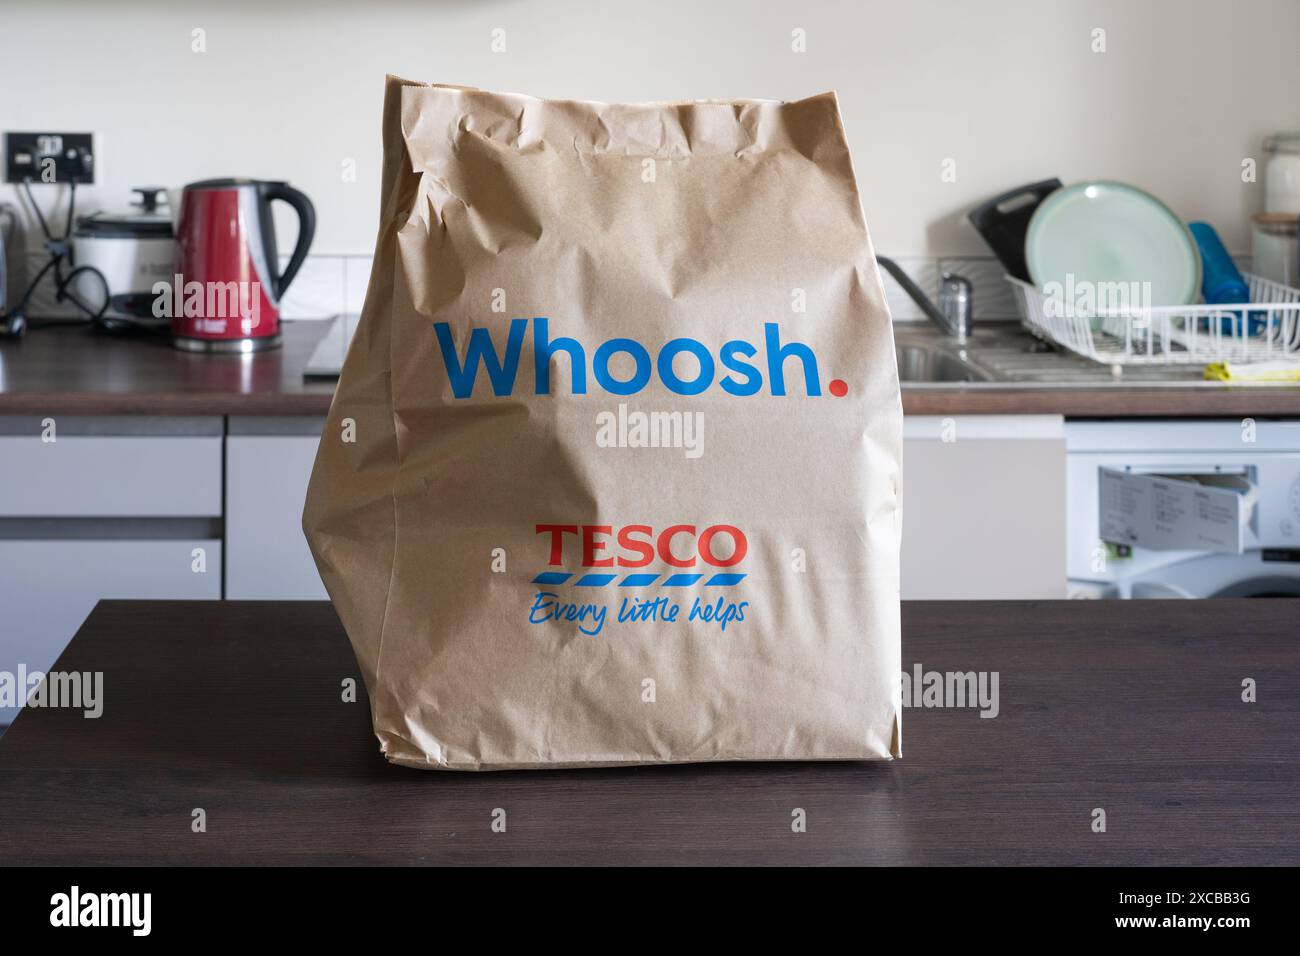 Whoosh paper bag full of groceries on a home kitchen counter - a Tesco supermarket brand for same day home delivery from Tesco Express. England Stock Photo